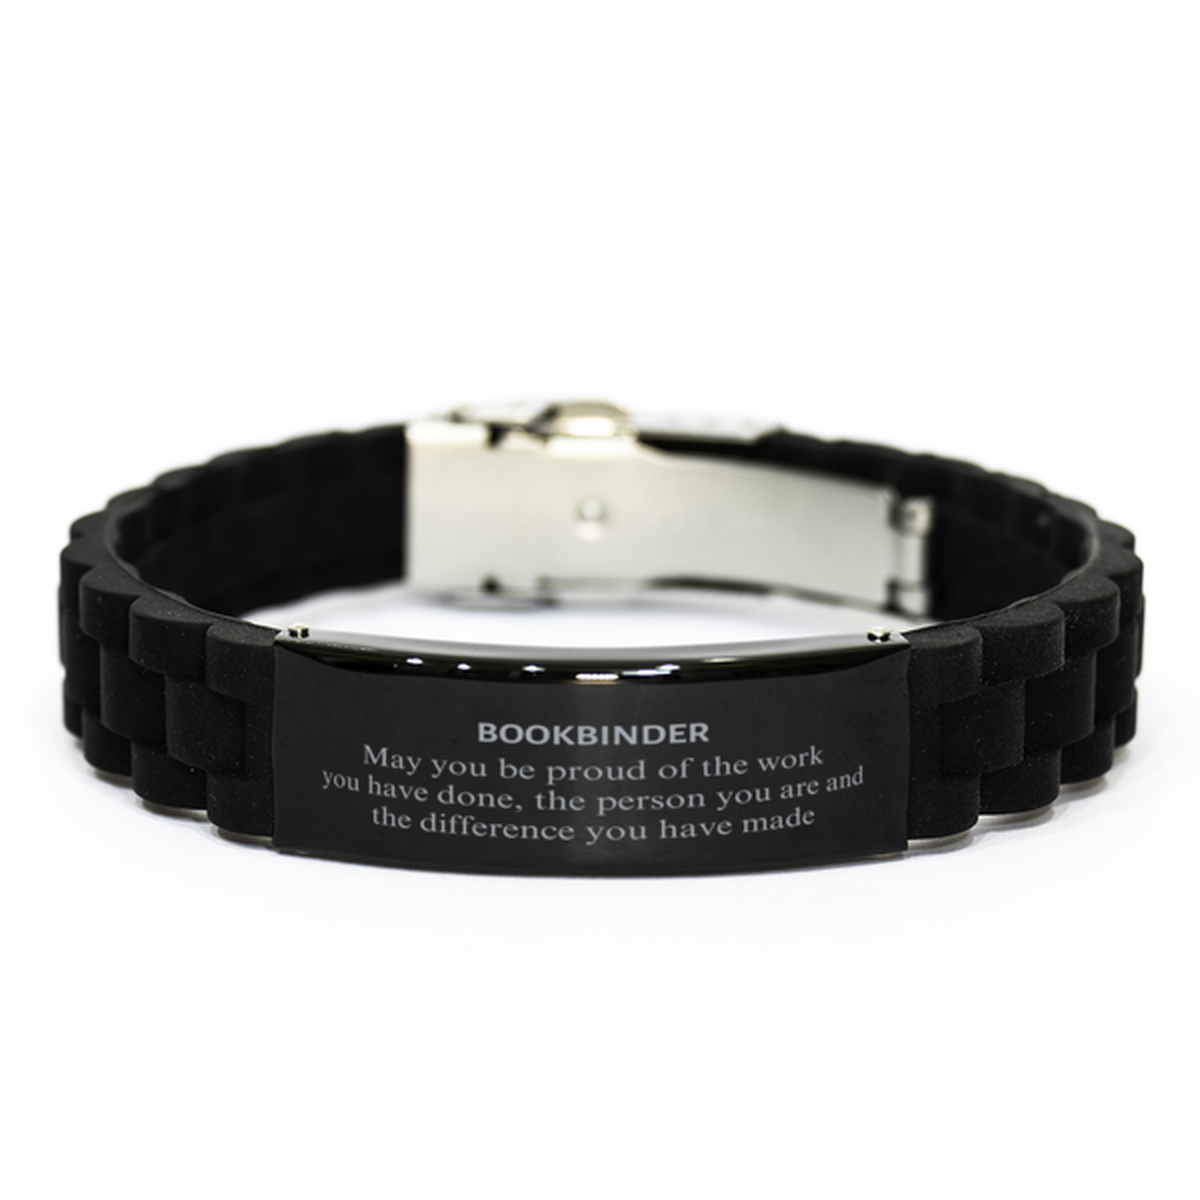 Bookbinder May you be proud of the work you have done, Retirement Bookbinder Black Glidelock Clasp Bracelet for Colleague Appreciation Gifts Amazing for Bookbinder